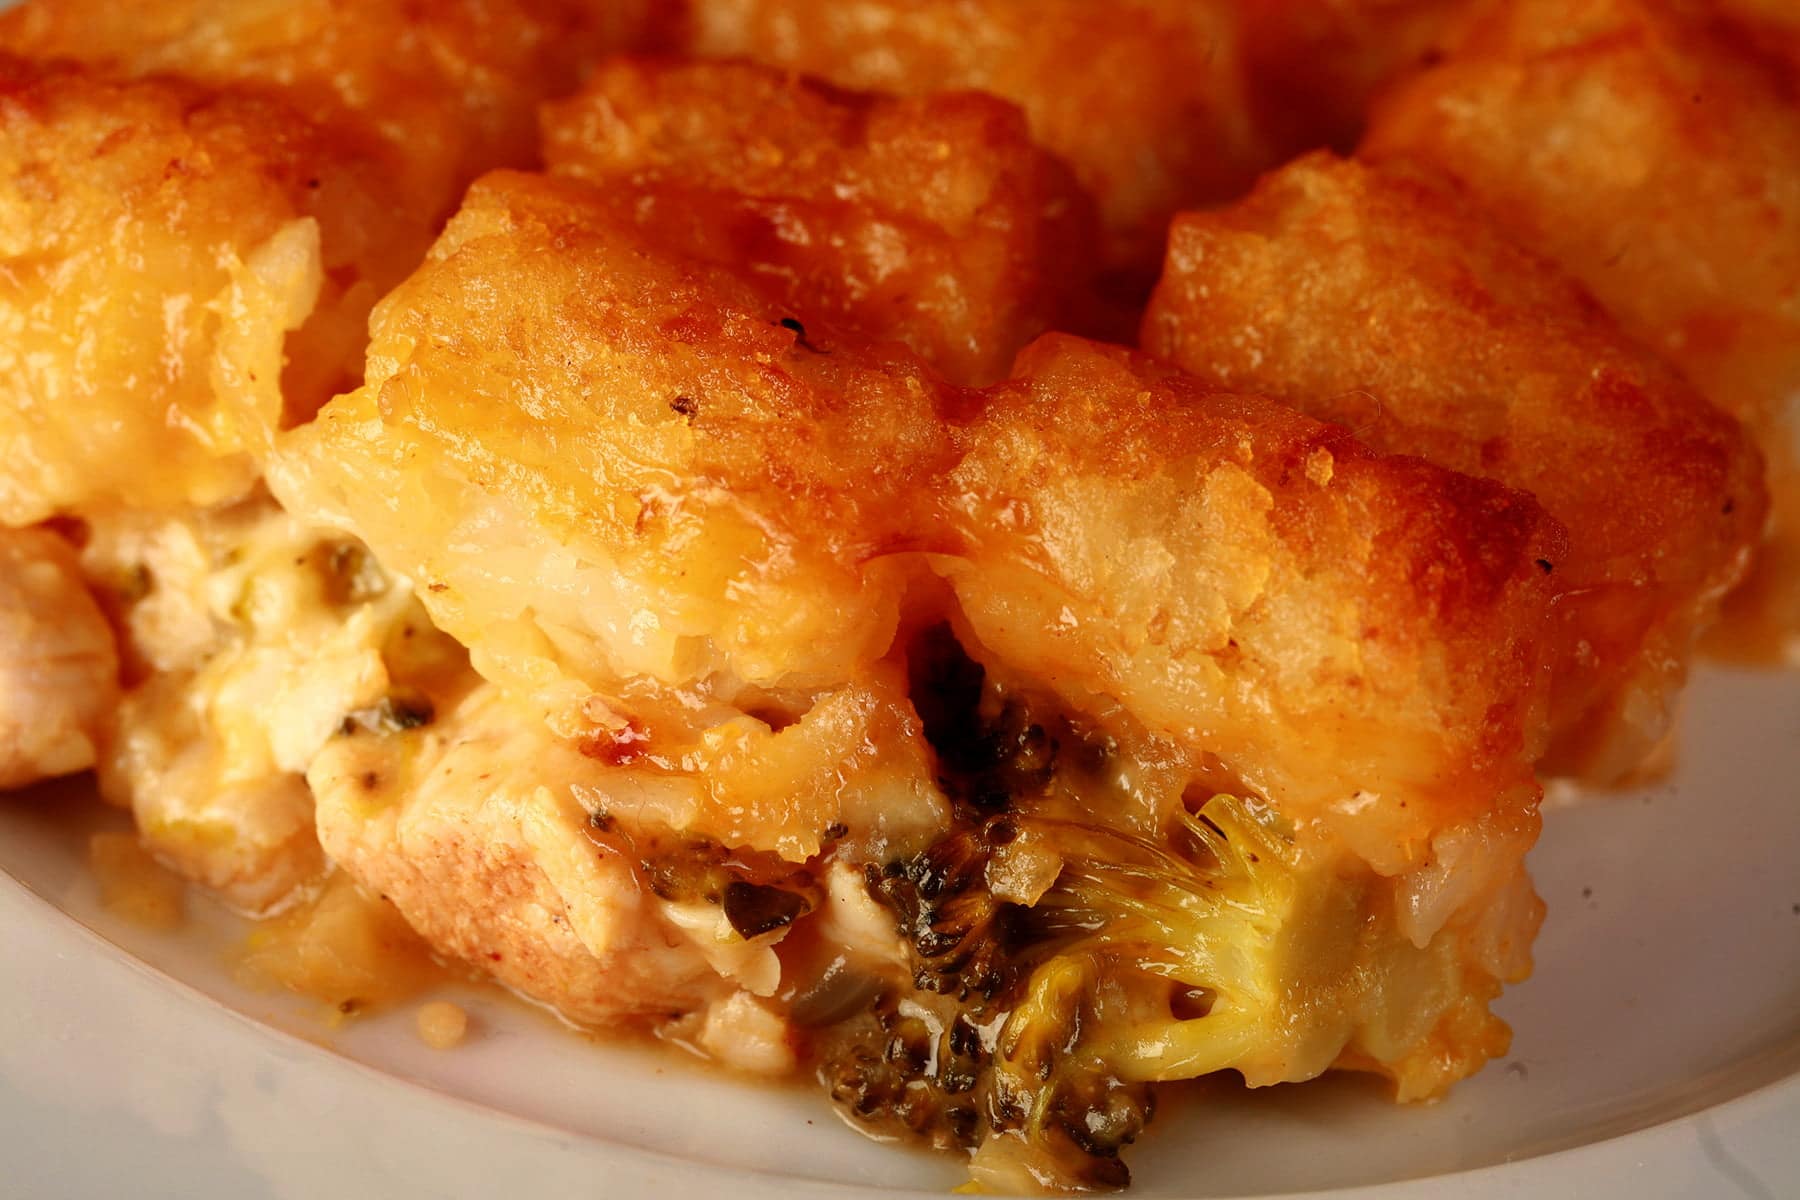 A serving of golden brown tater tot hotdish on a white plate. Cheese and broccoli are visible in the bottom layer.